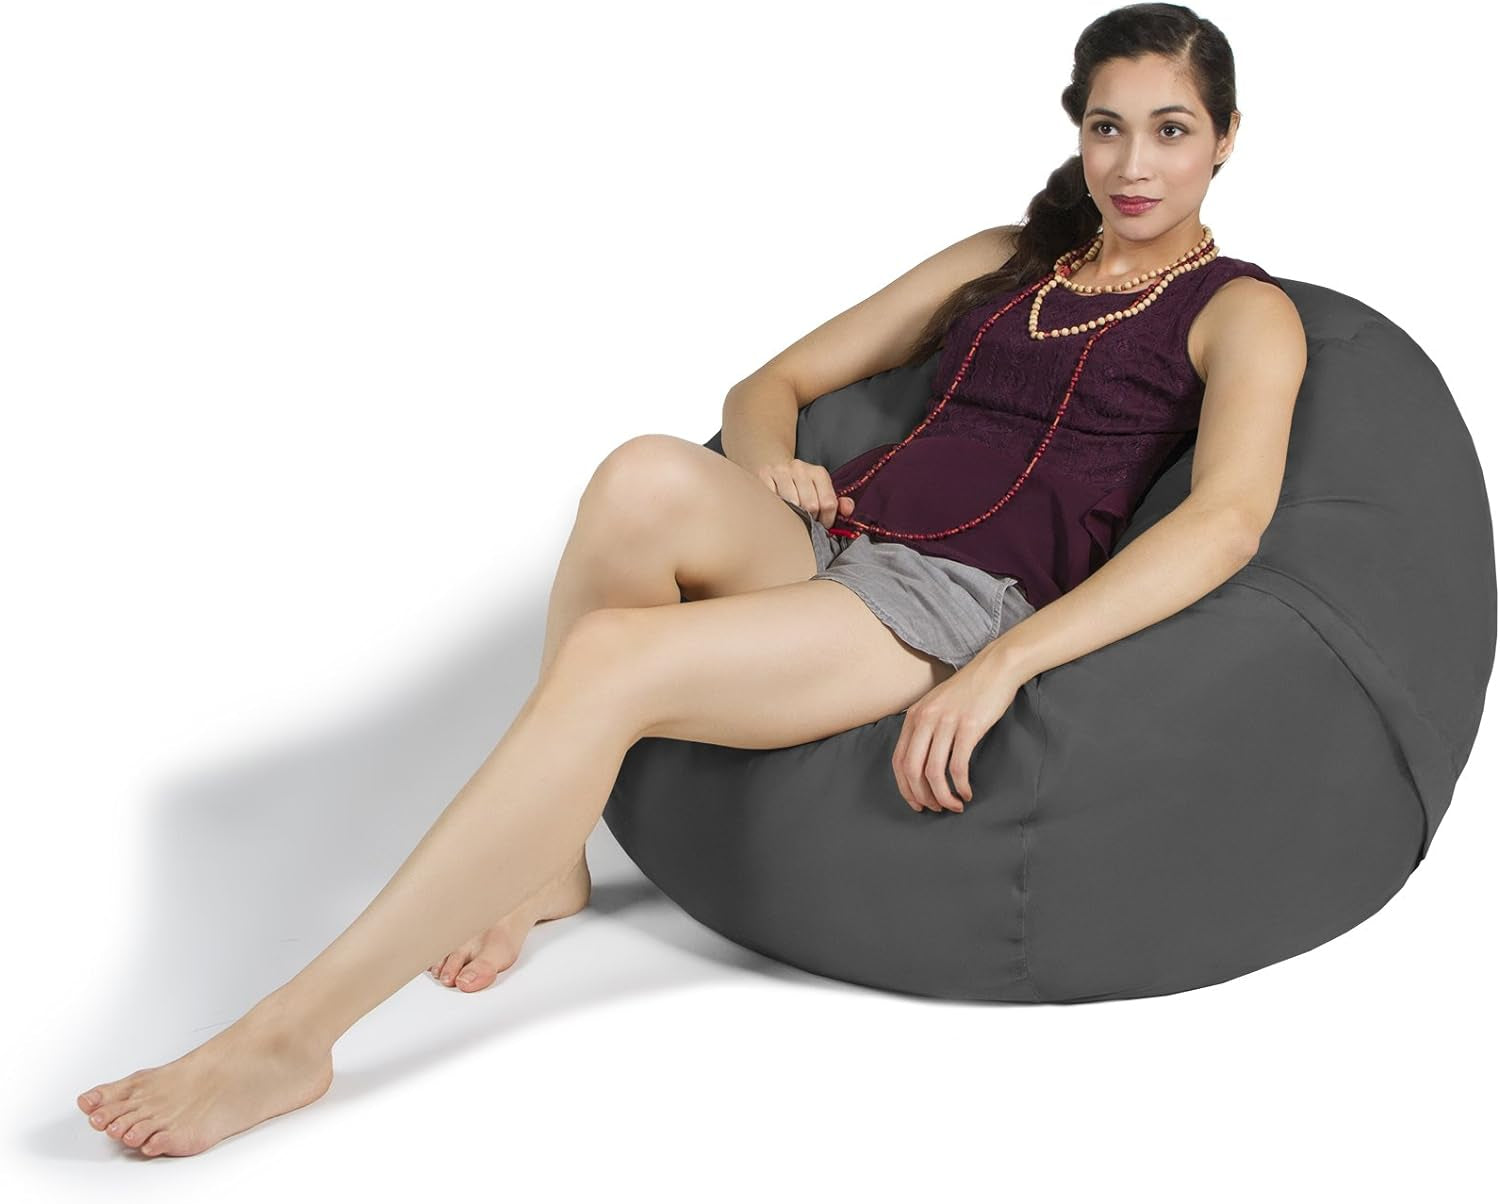 Saxx 3 Foot Bean Bag Chair with Removable Cover, 3', Charcoal